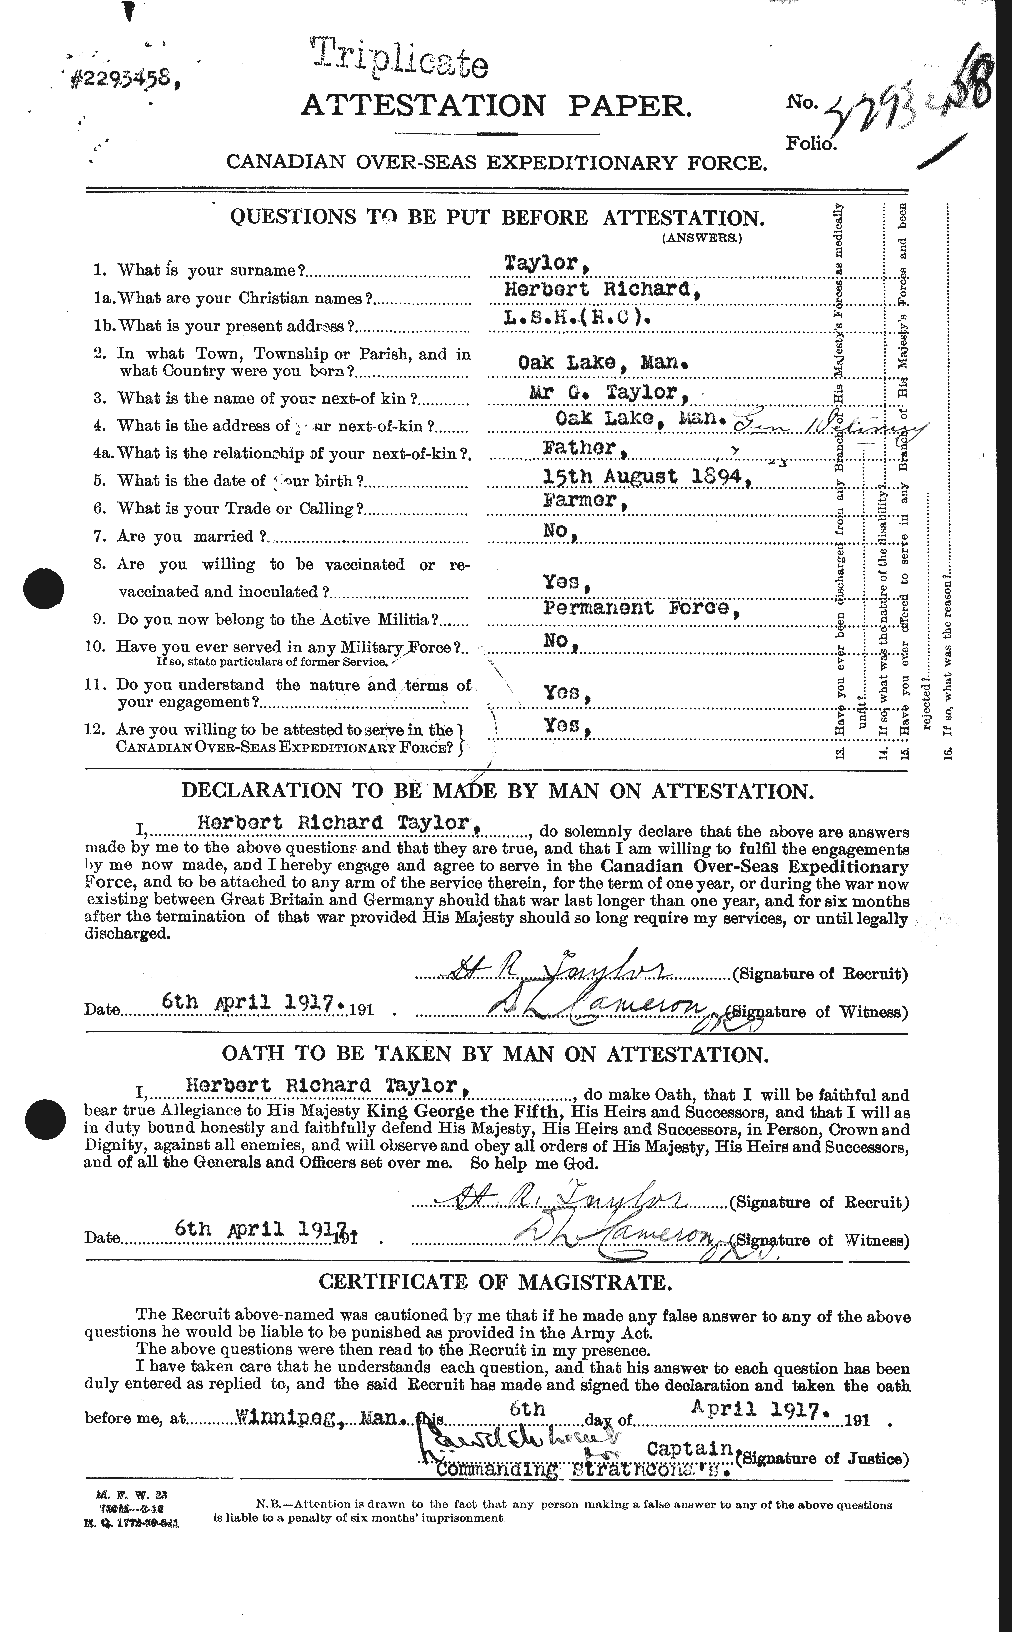 Personnel Records of the First World War - CEF 626578a